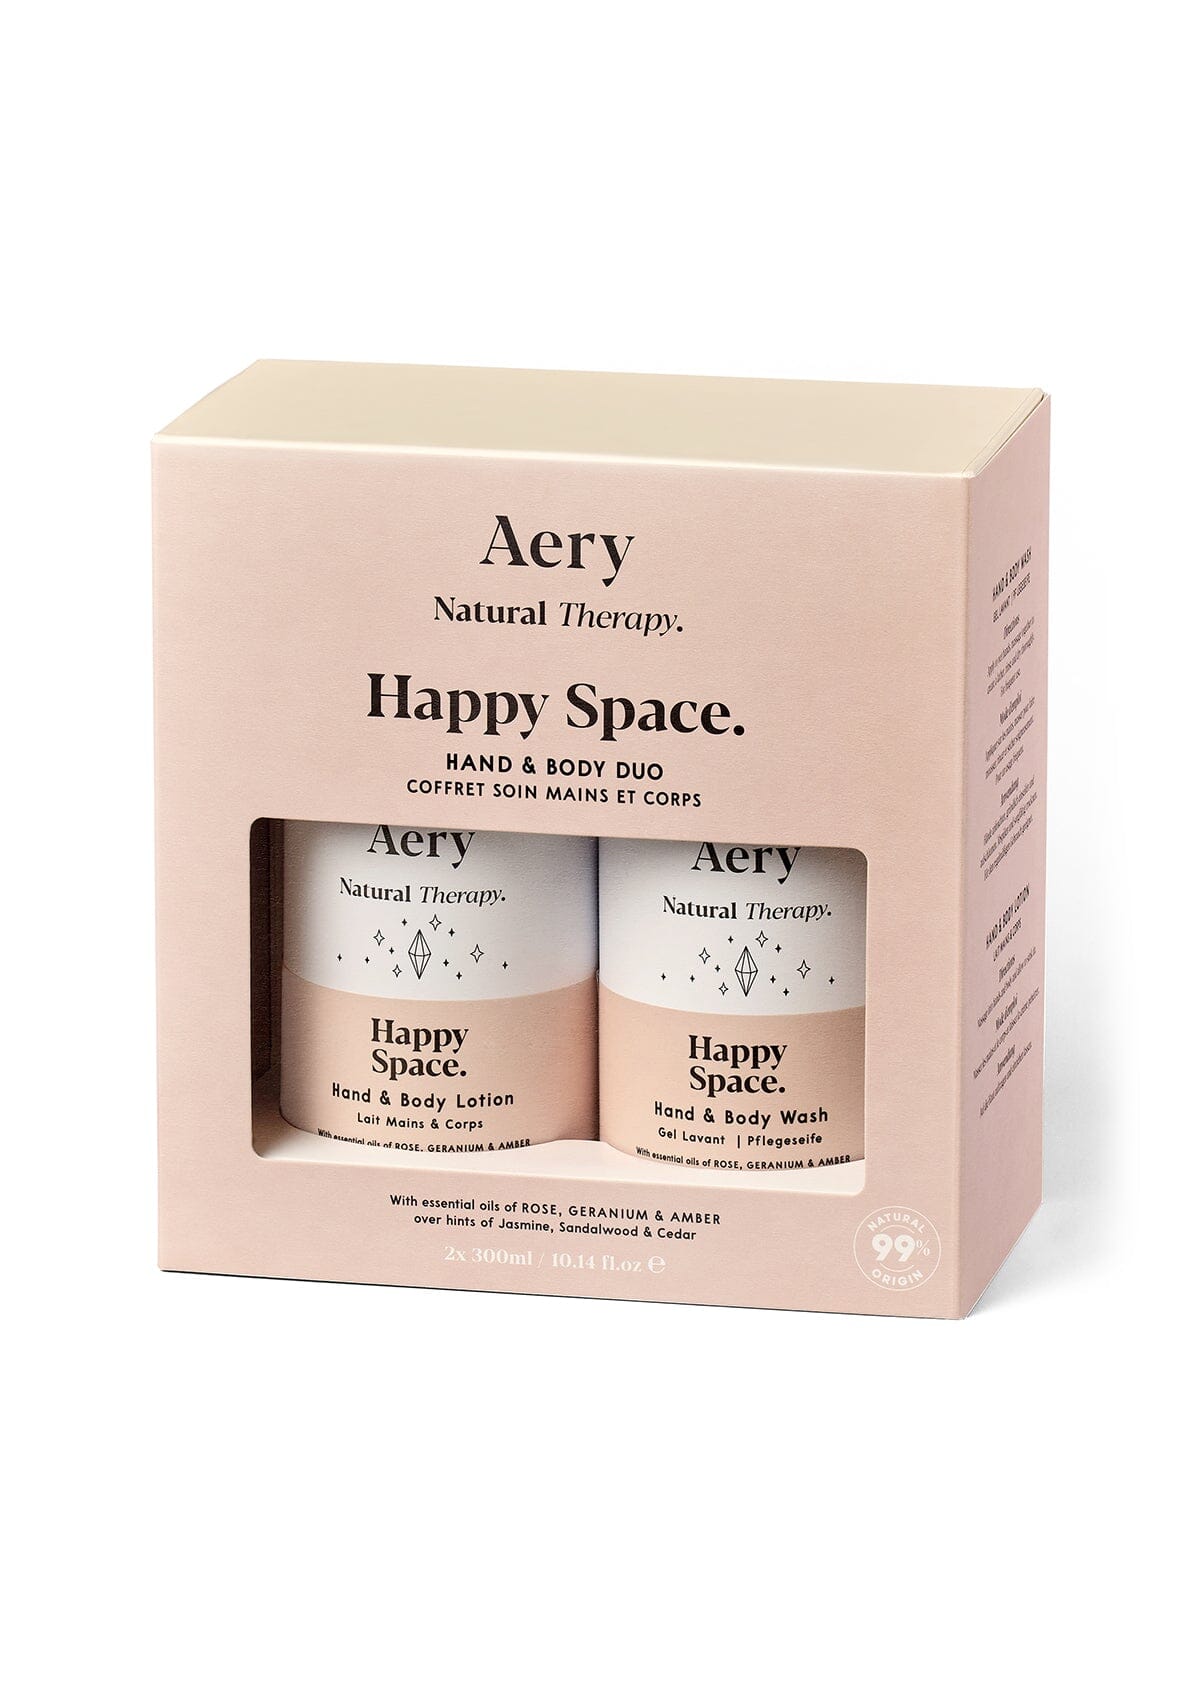 Pink Happy Space  hand and body duo displayed in product packaging by Aery on white background